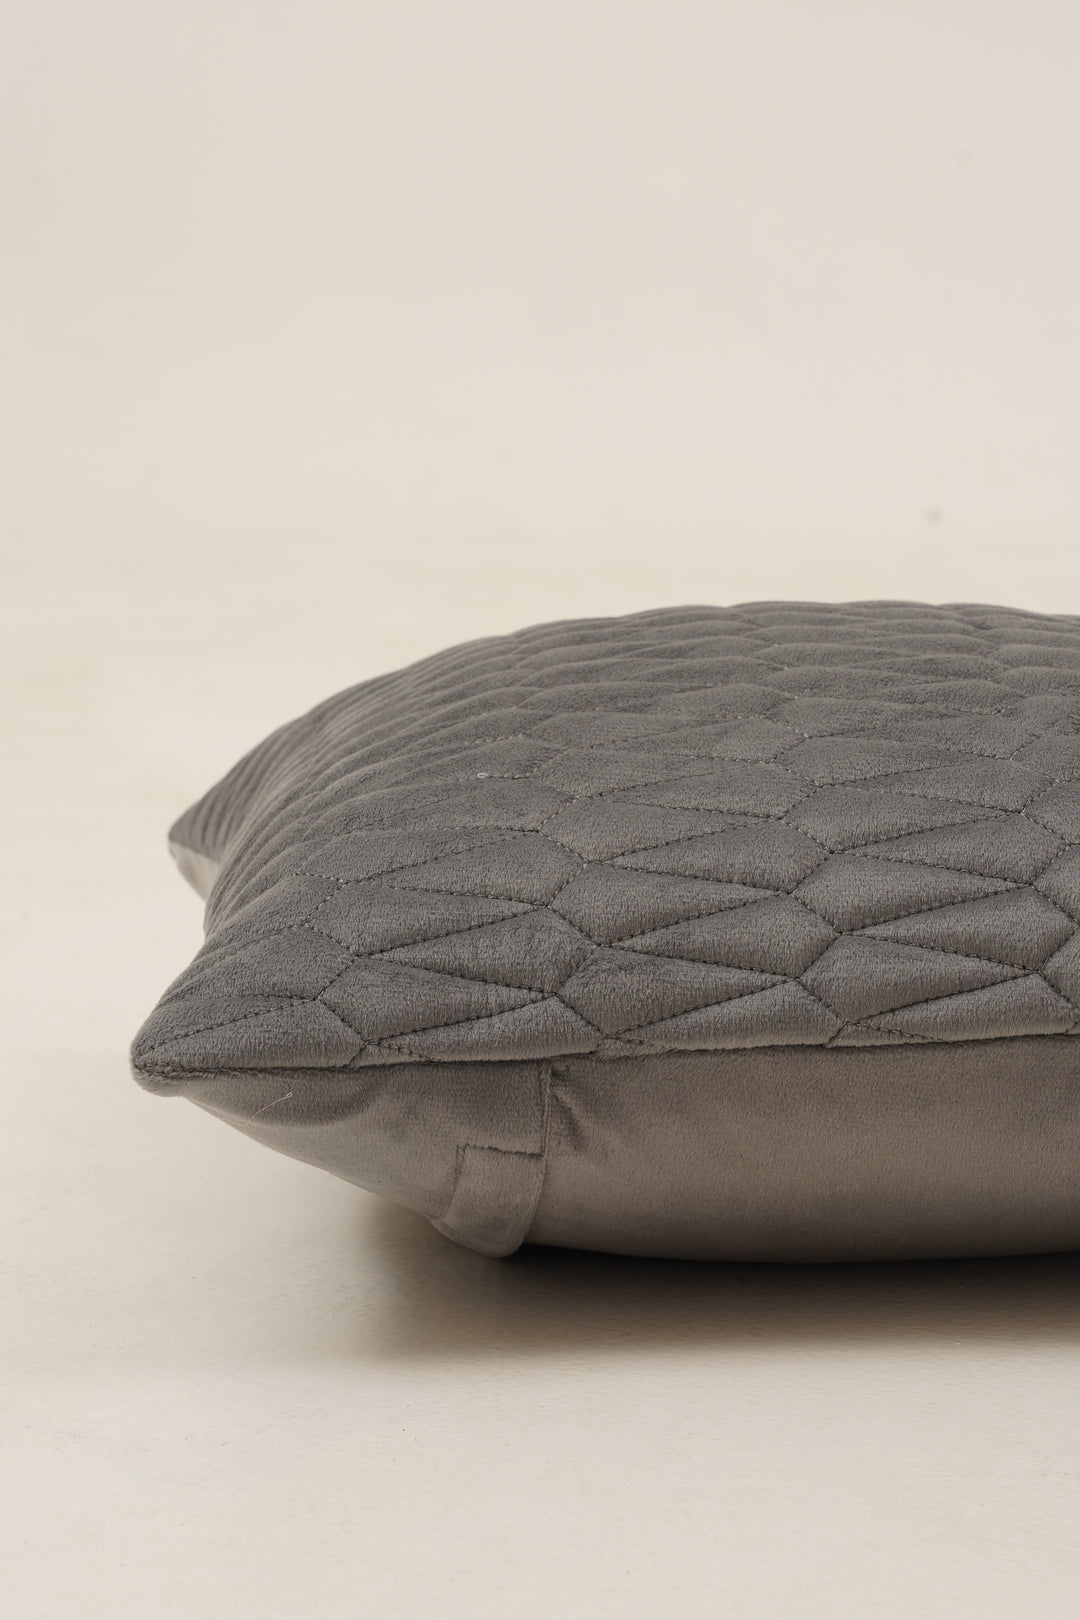 Sapphire Cushion Cover 16 x 16. Set of 2 (Grey)